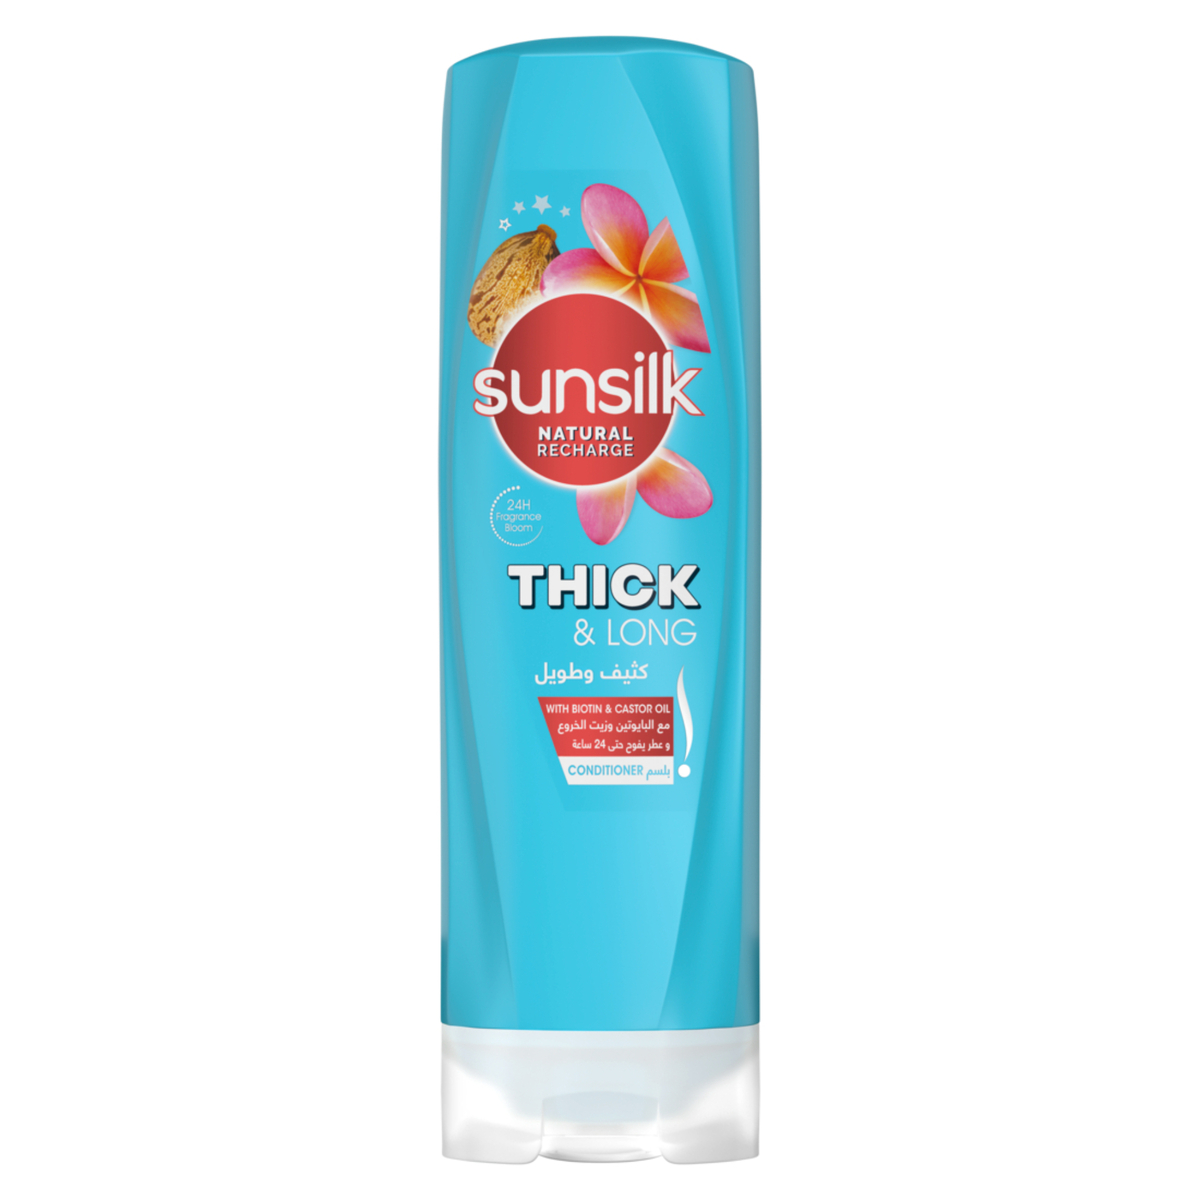 Sunsilk Thick & Long With Biotin & Castor Oil Conditioner 350 ml